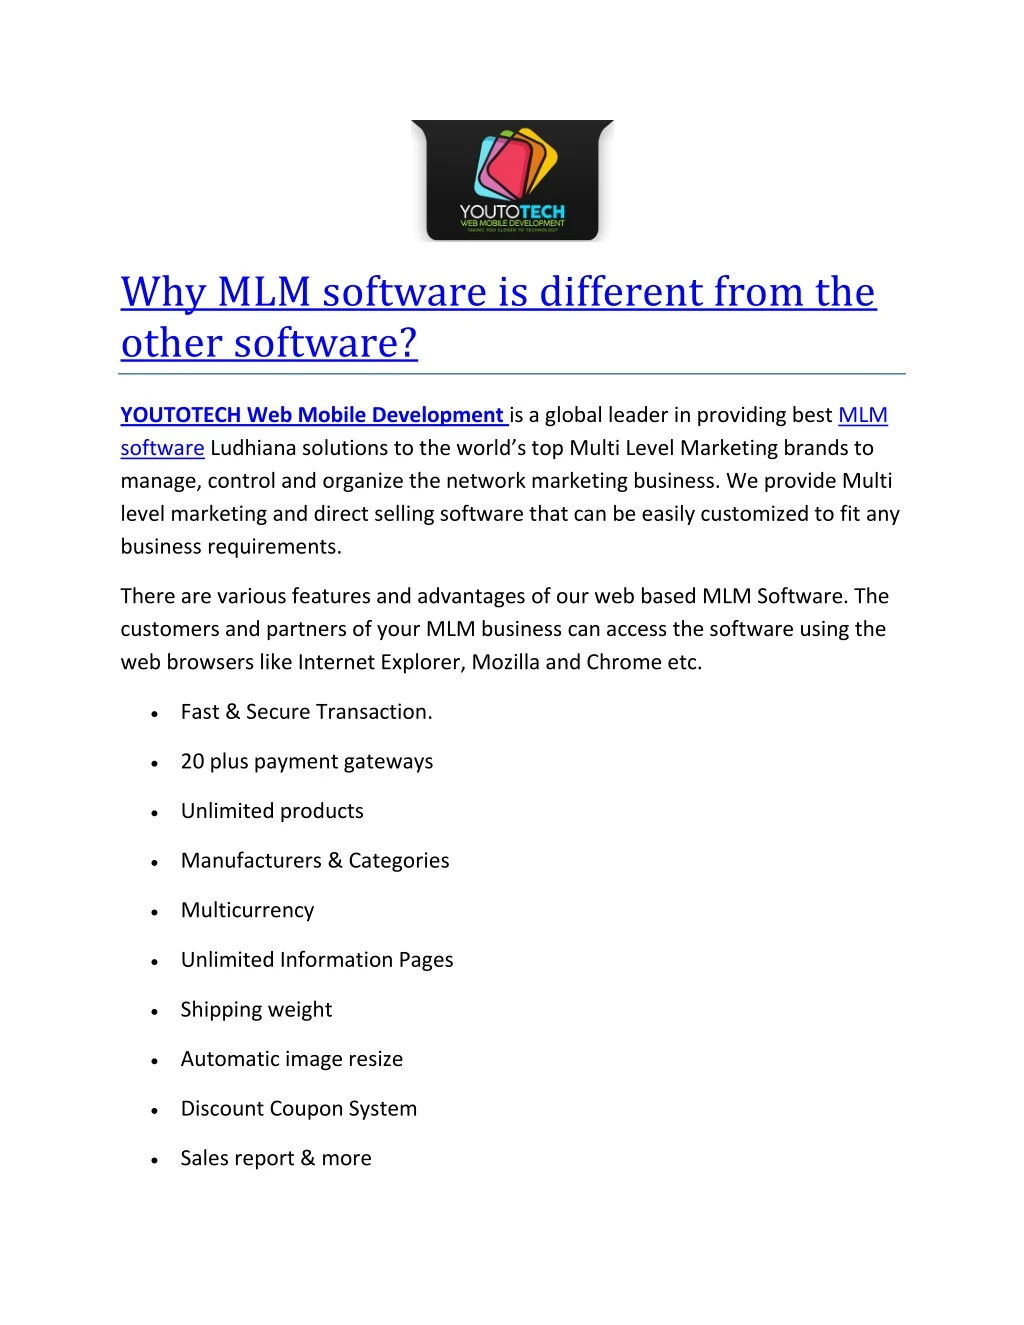 why mlm software is different from the other